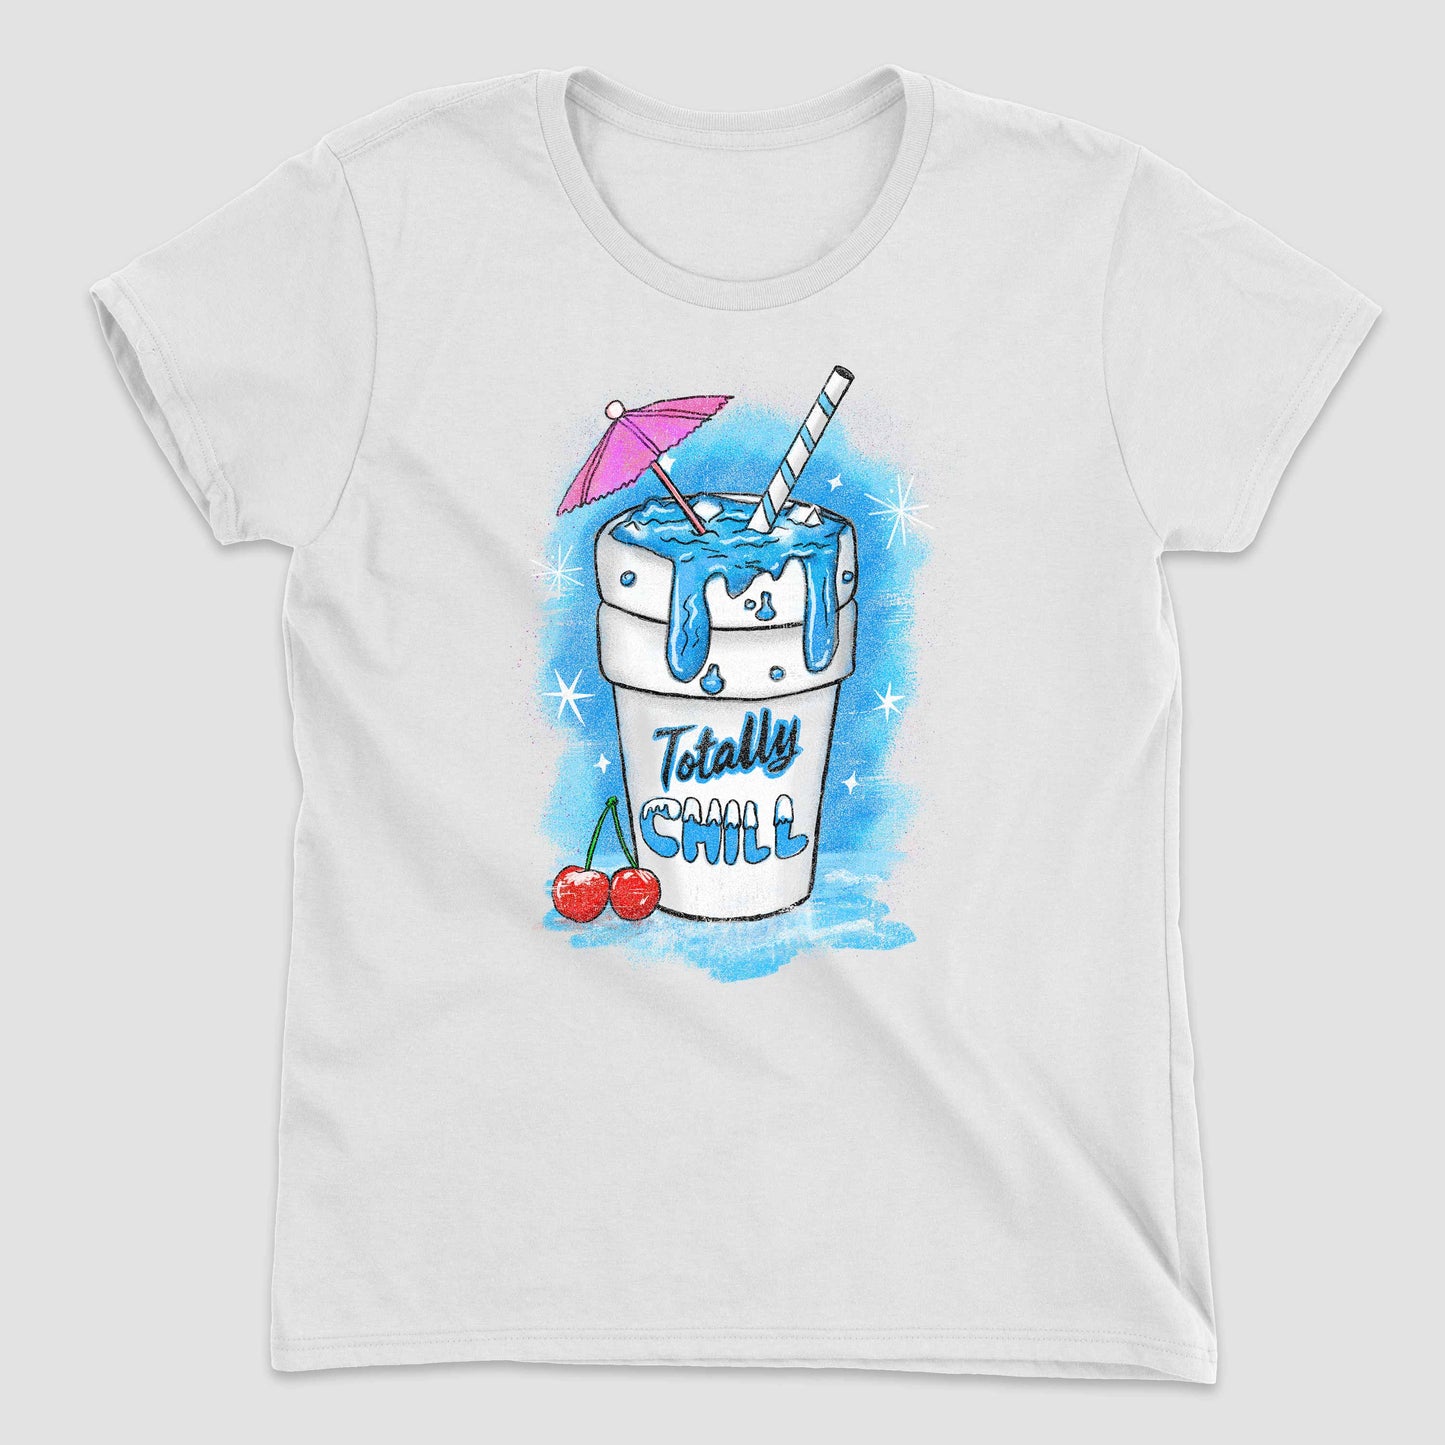 White Totally Chill Women's Graphic T-Shirt by Snaxtime